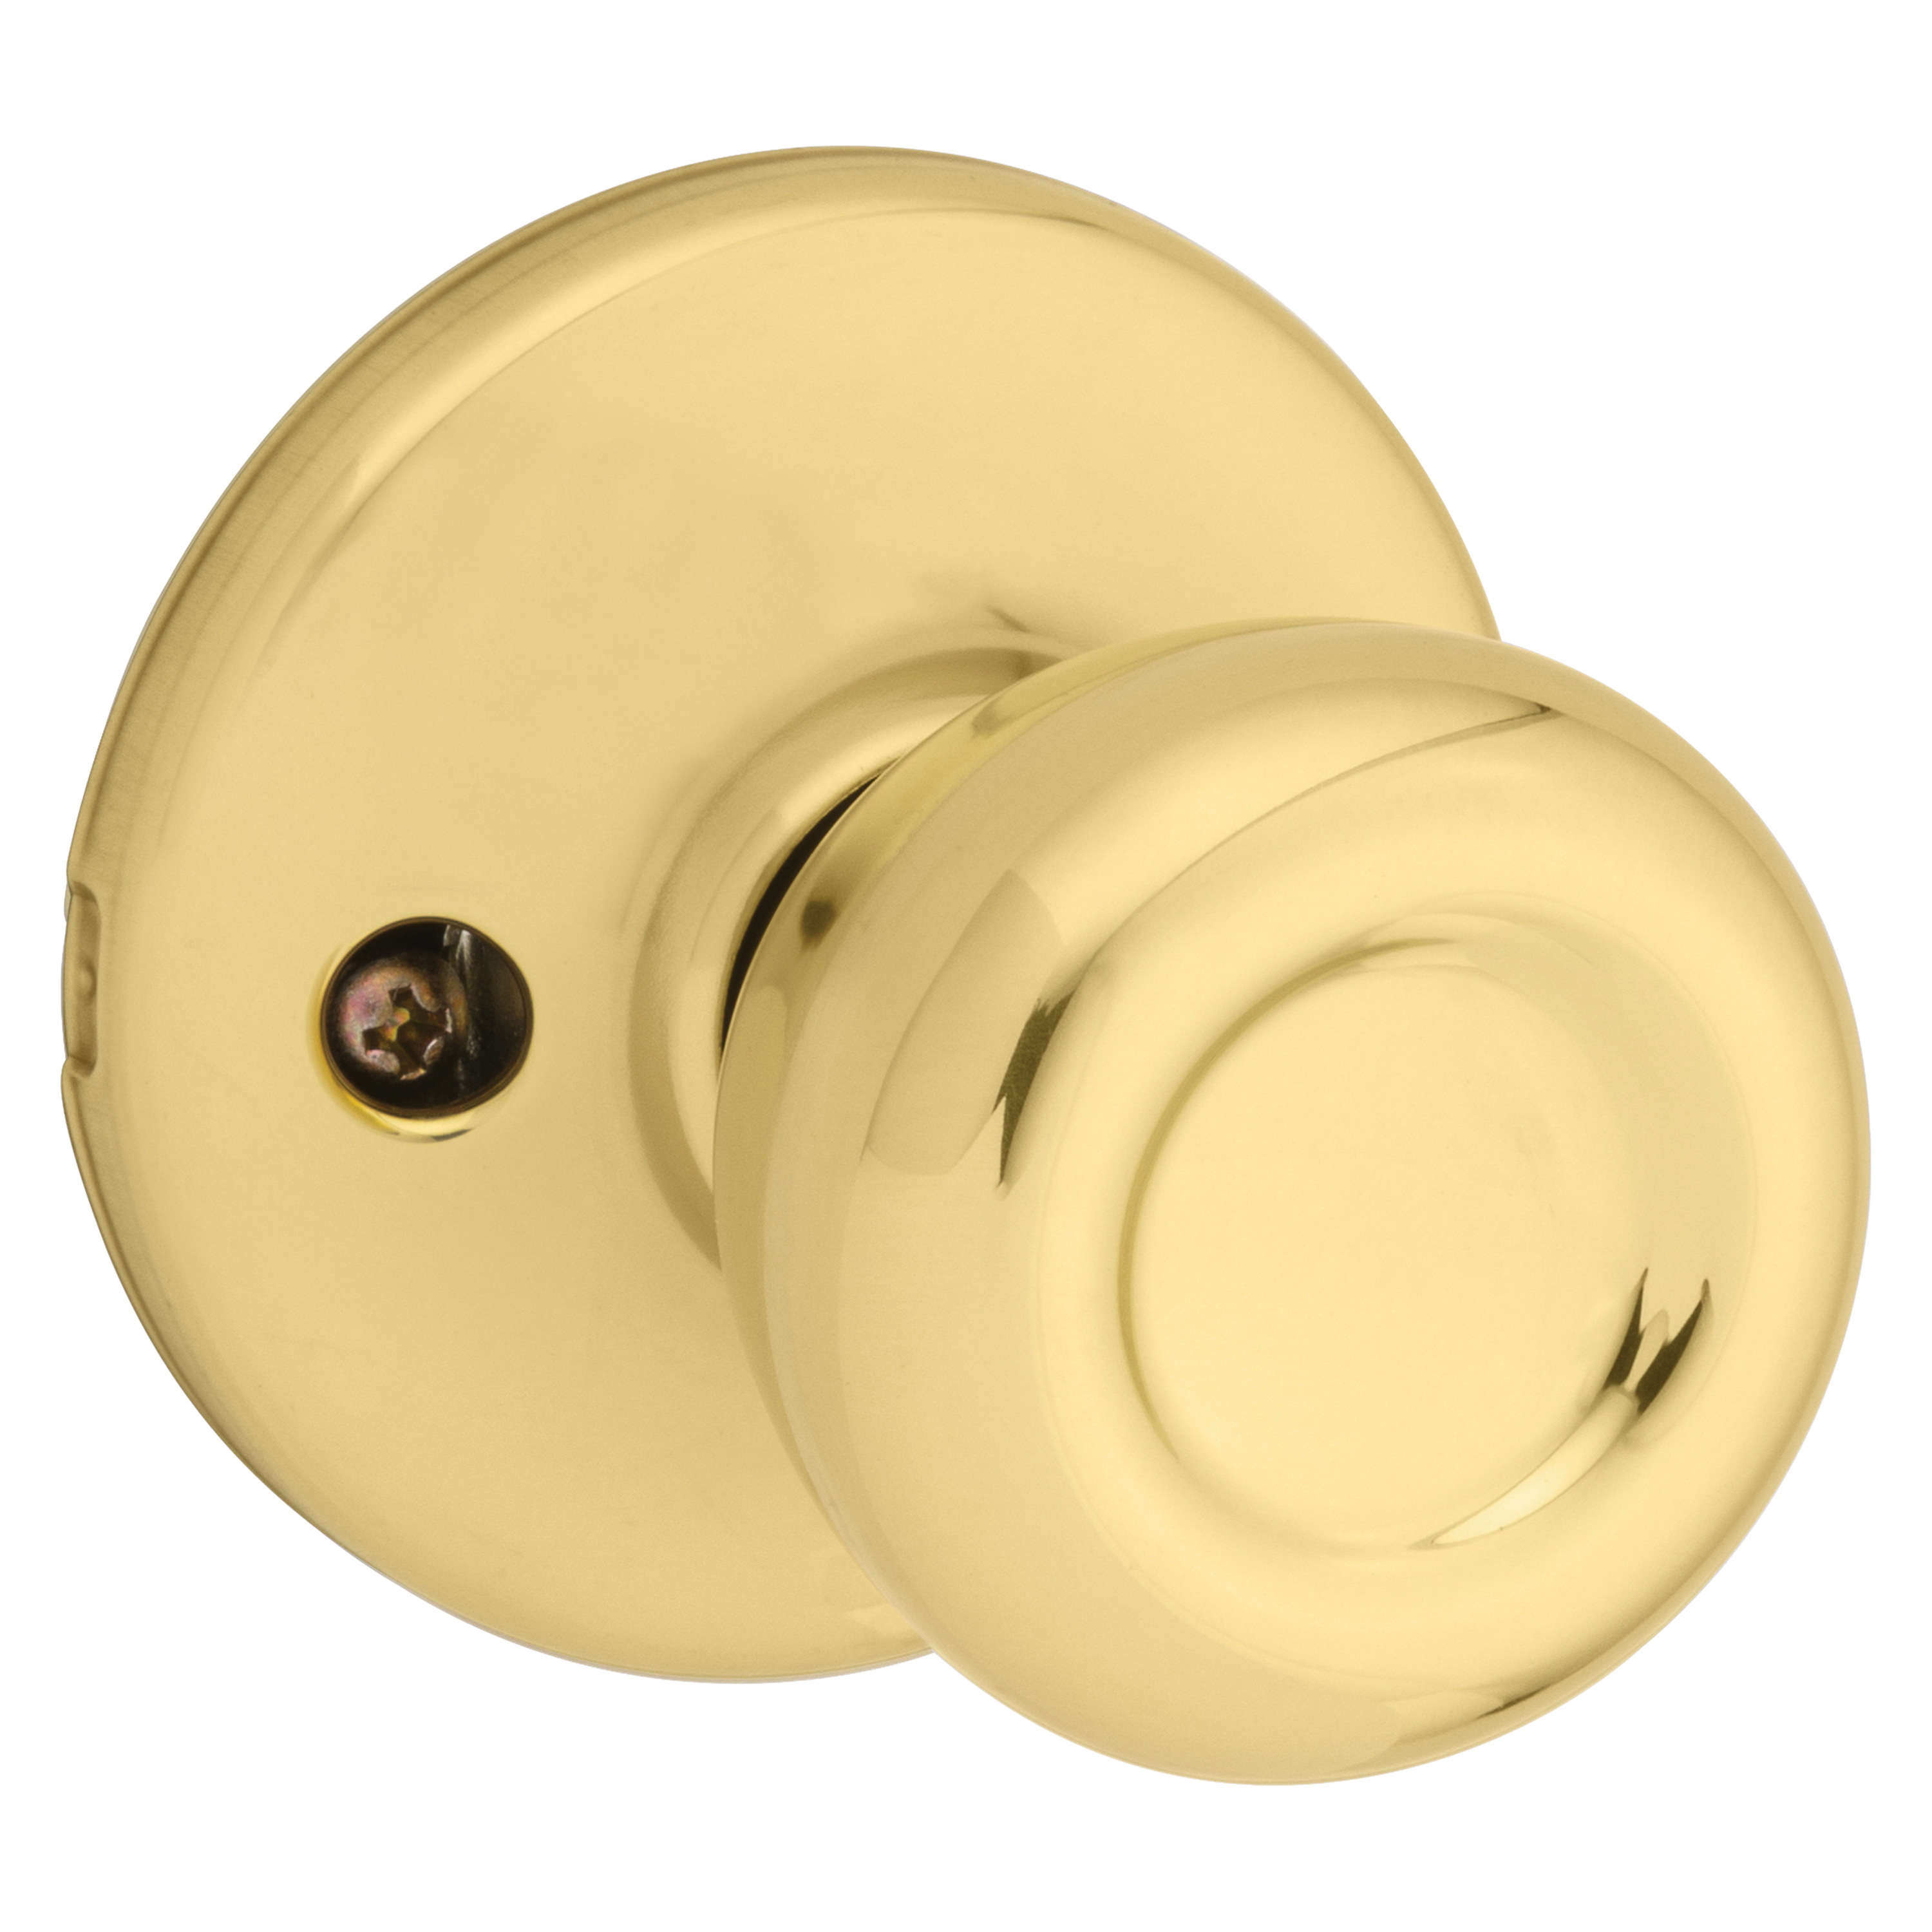 488T 3 V1 Dummy Knob, Tylo Design, Polished Brass, Residential, 1-3/4 to 1-3/8 in Thick Door, Zinc